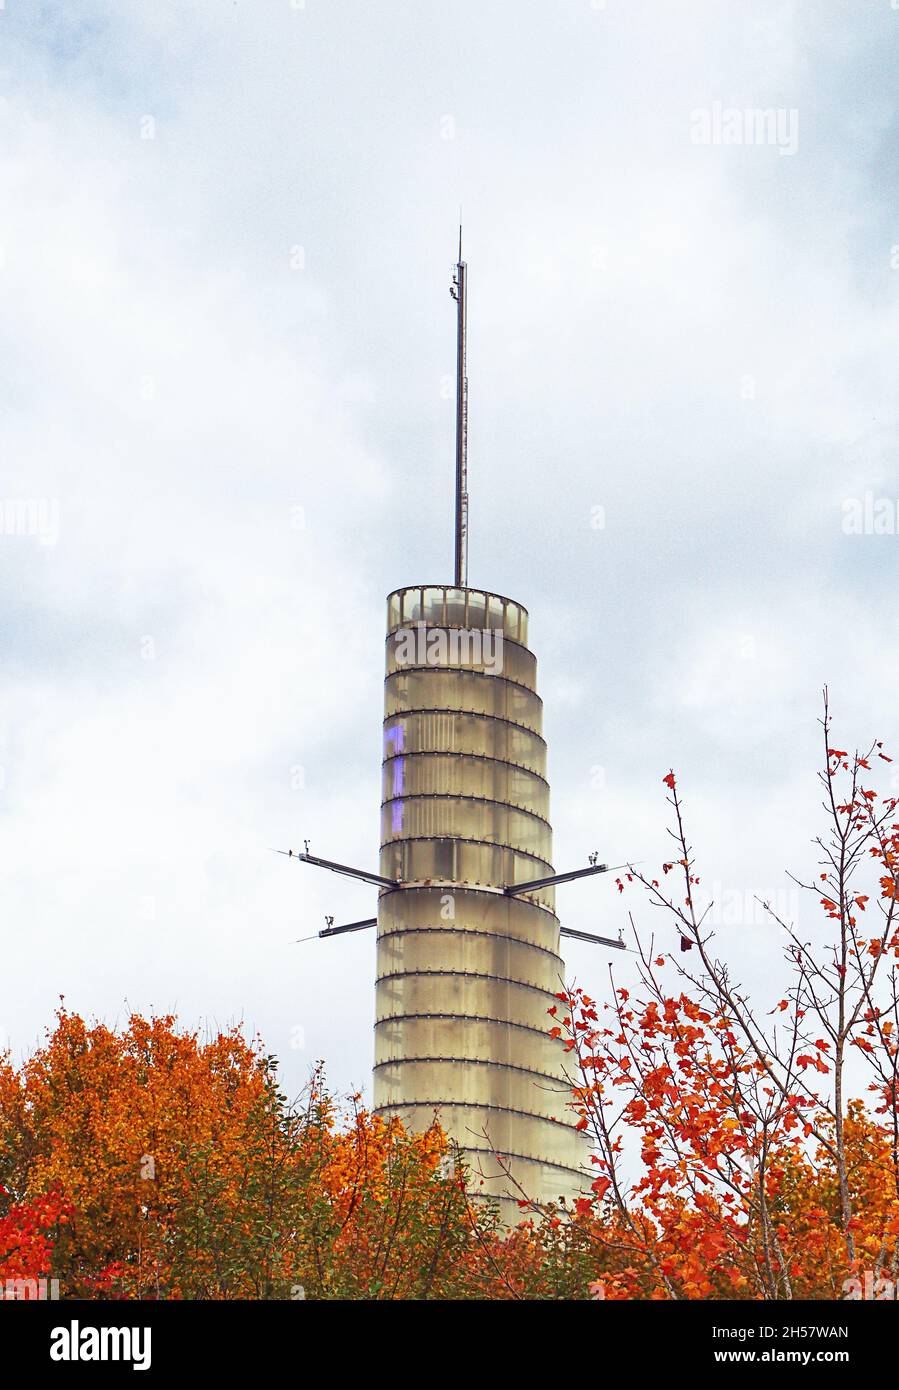 Garching research campus - Technical University Munich, Germany, Oskar-von-Miller meteorological tower  to collect climatology measurements Stock Photo